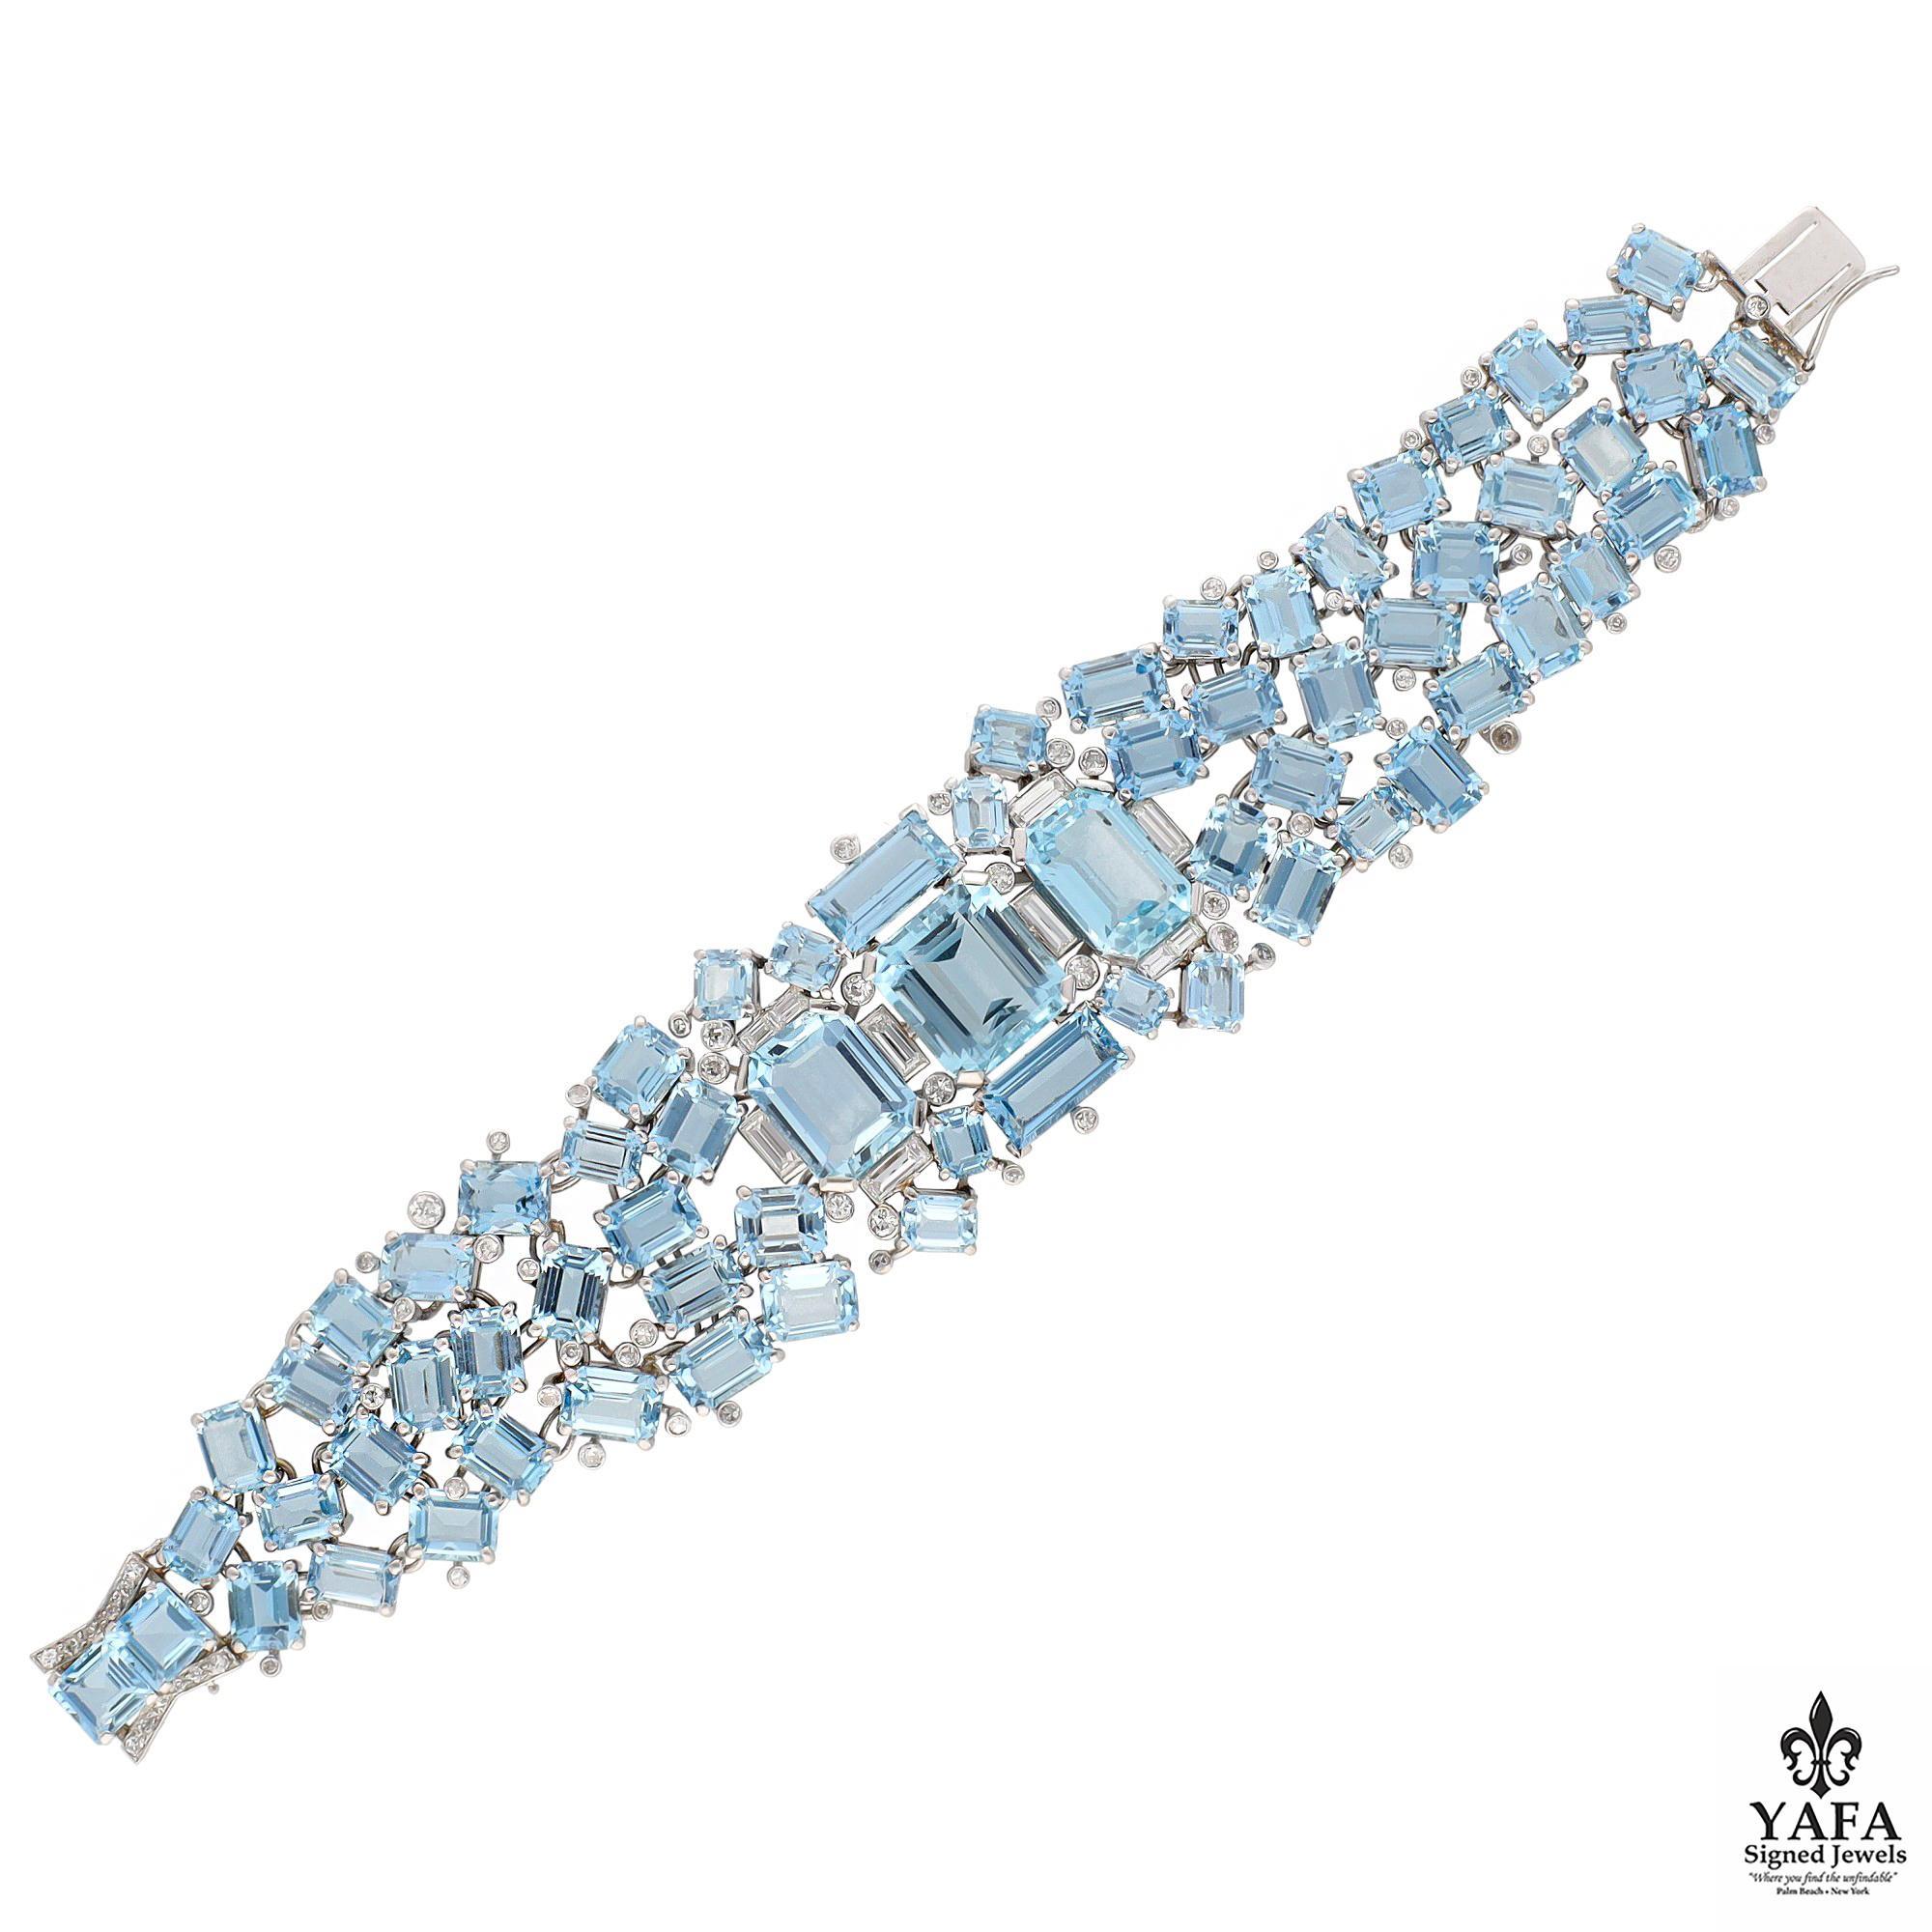 62 Vibrantly Electric Emerald Cut Aquamarines, Creatively Scattered Yet Highly Intricately Placed are Joined in the Center by 3 Additional Emerald Cut and 2 Baguette Cut Aquamarines. Further, Round and Baguette Diamonds are Interspersed Completing